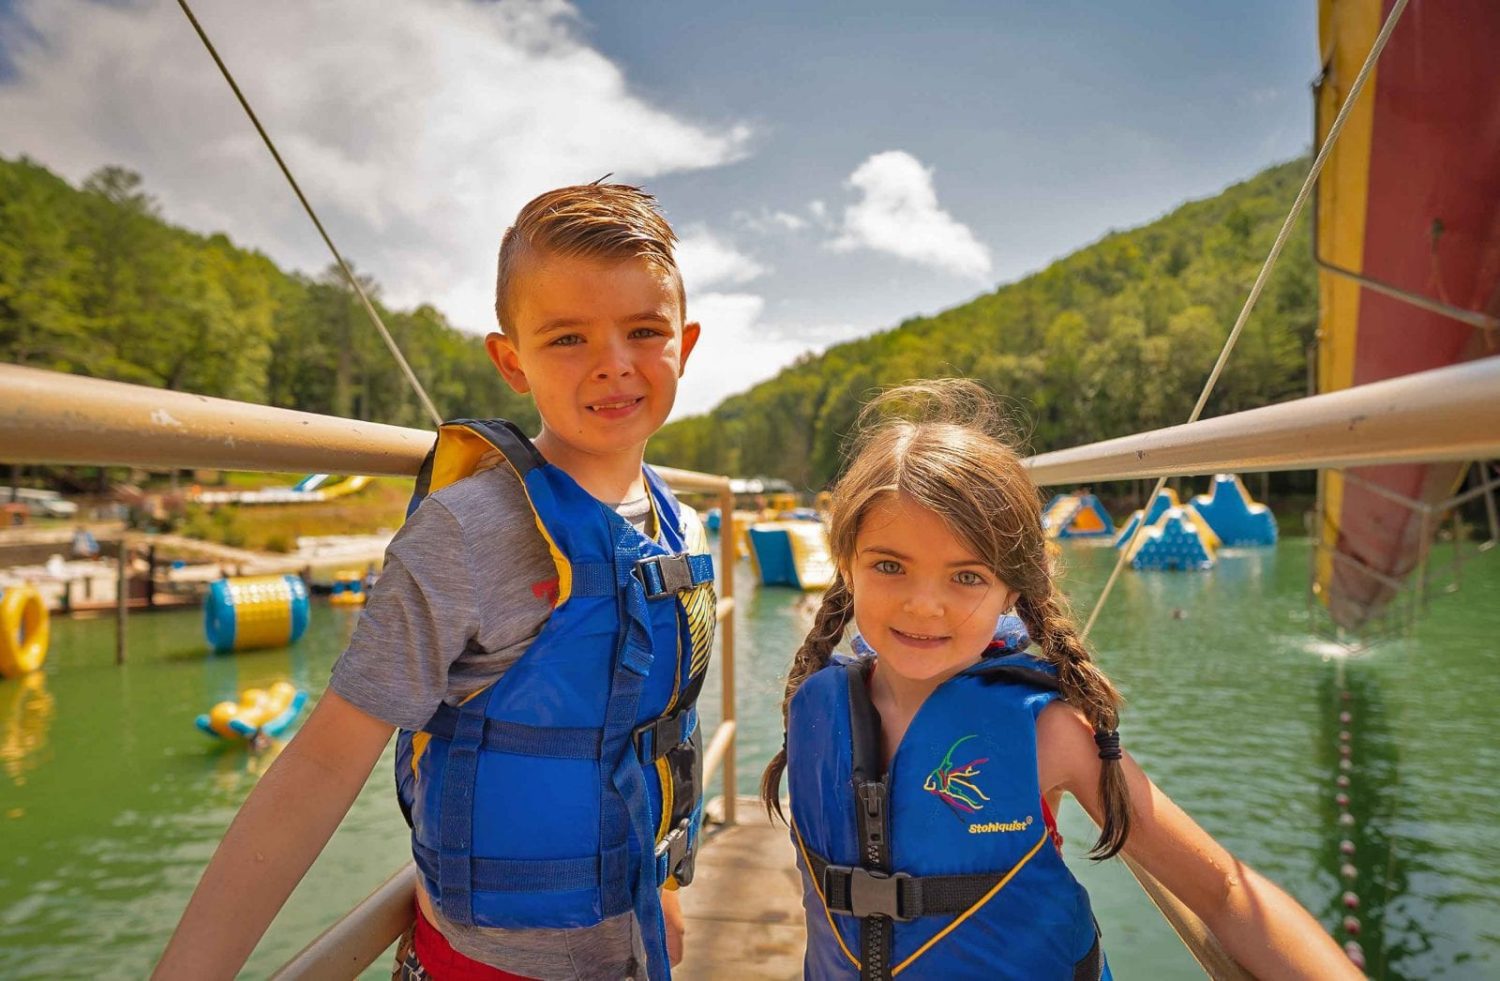 A young brother and sister smile from the water park tower at ace adventure resort in west virginia. ACE is one of the best summer camps in West Virginia!